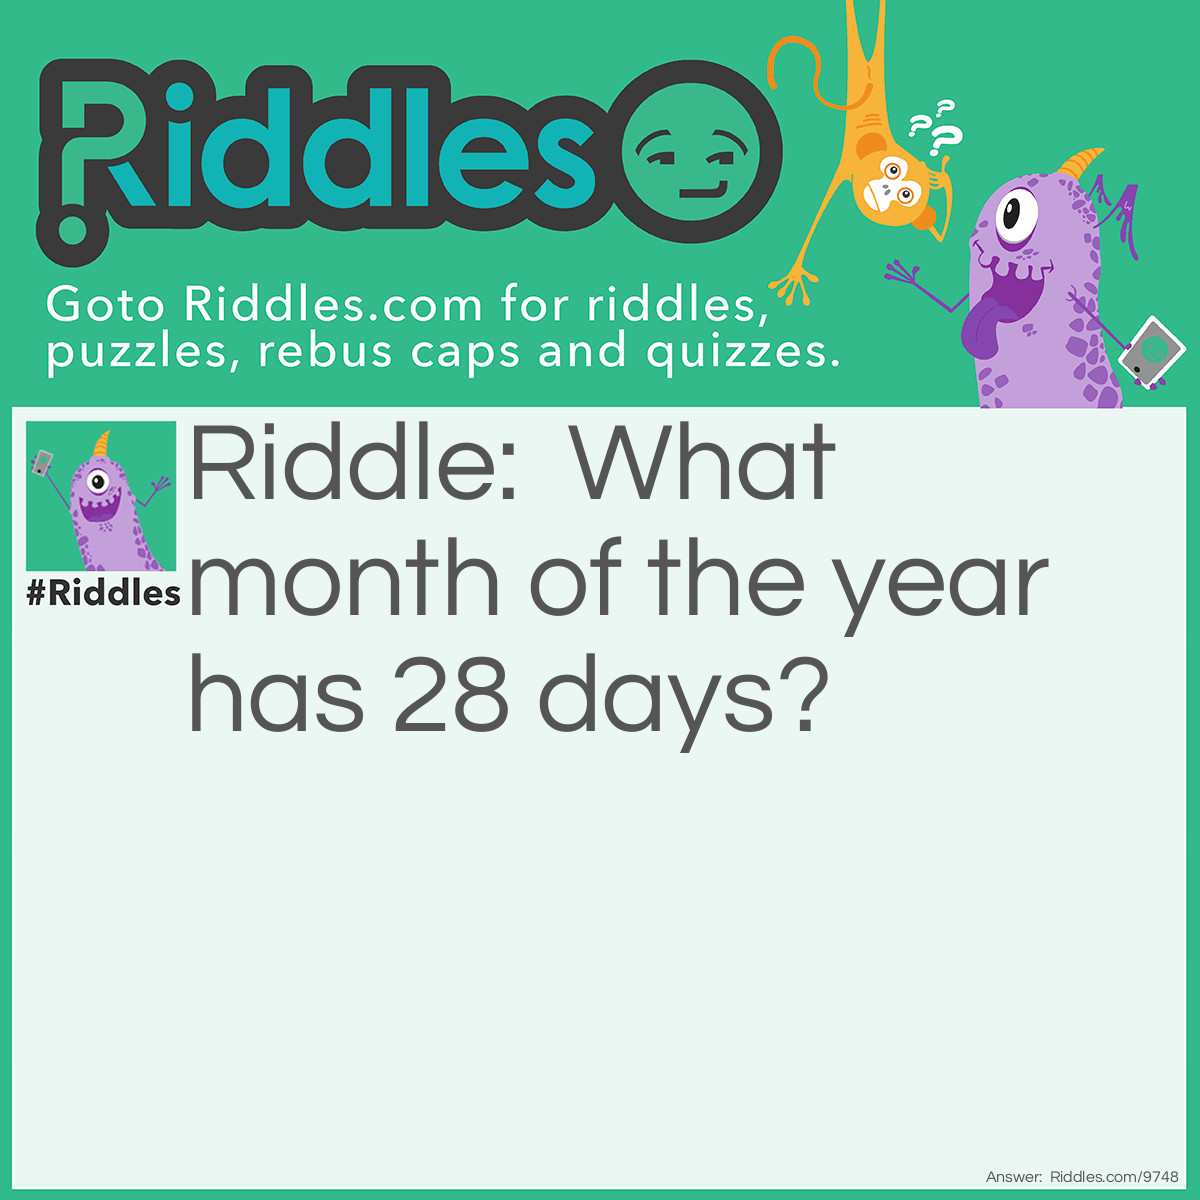 Riddle: What month of the year has 28 days? Answer: All of them!